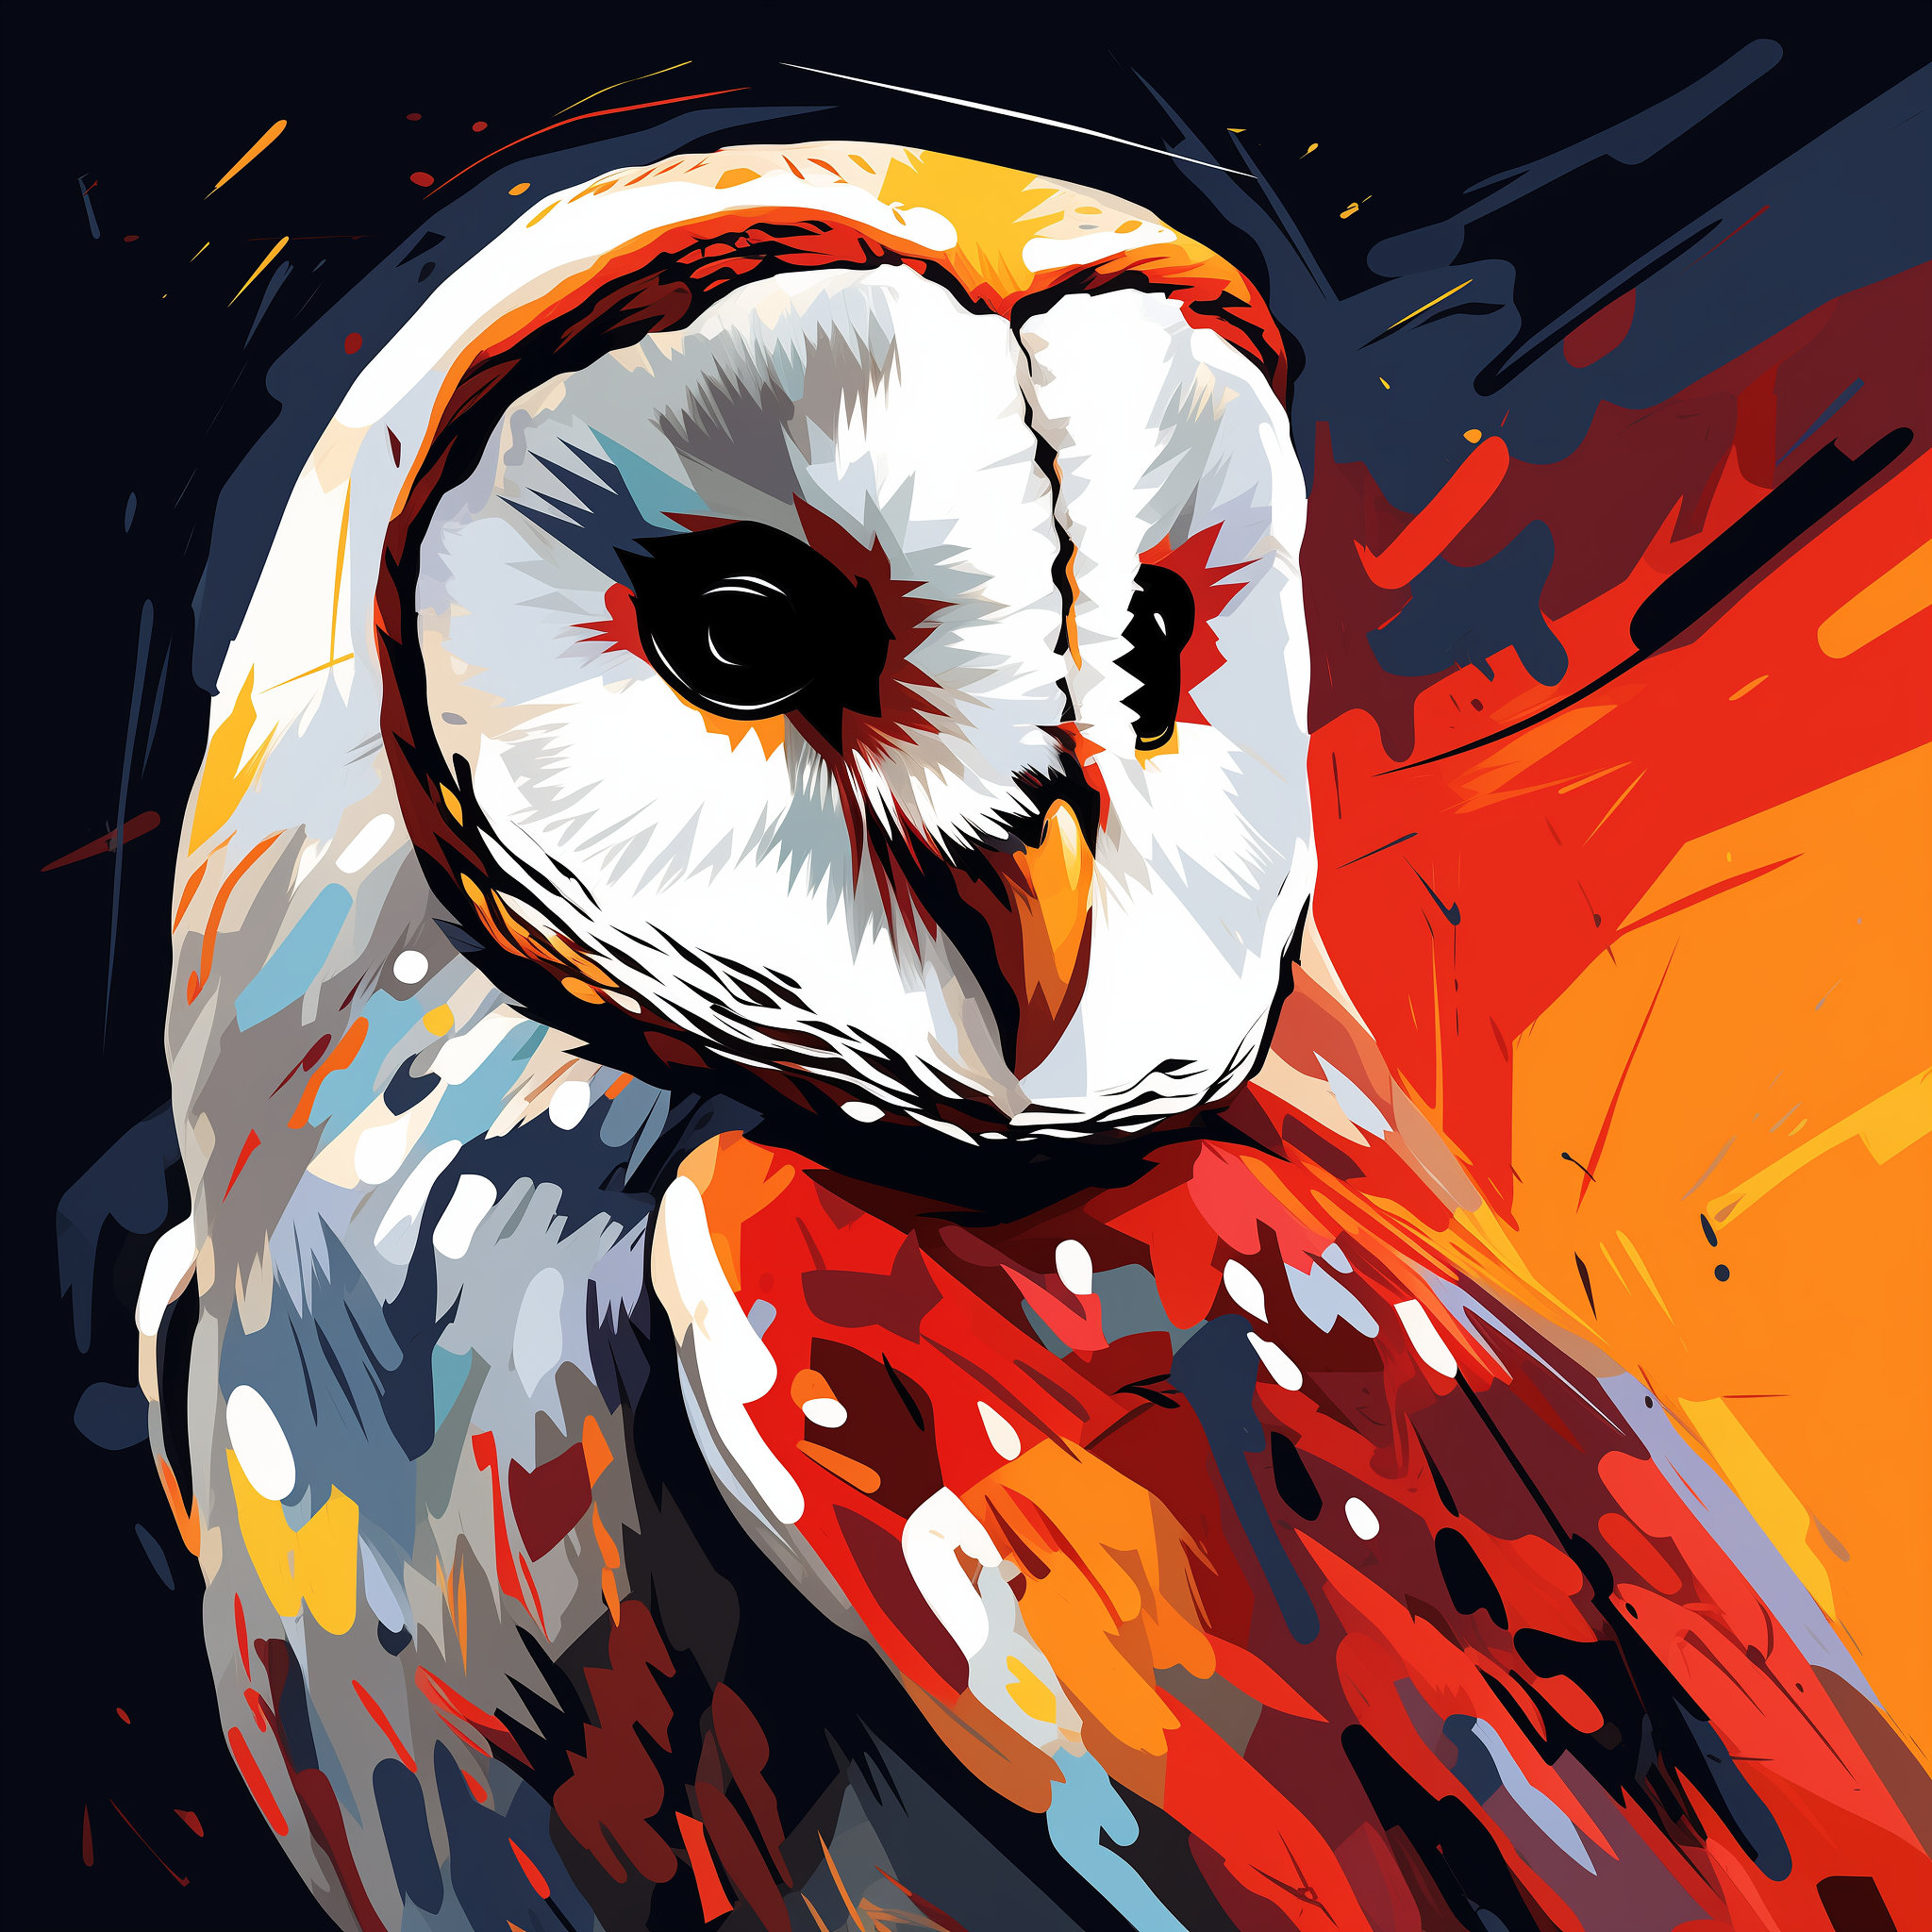 Stylized pop art avatar of a barn owl with vibrant orange and blue accents suitable as a profile picture.